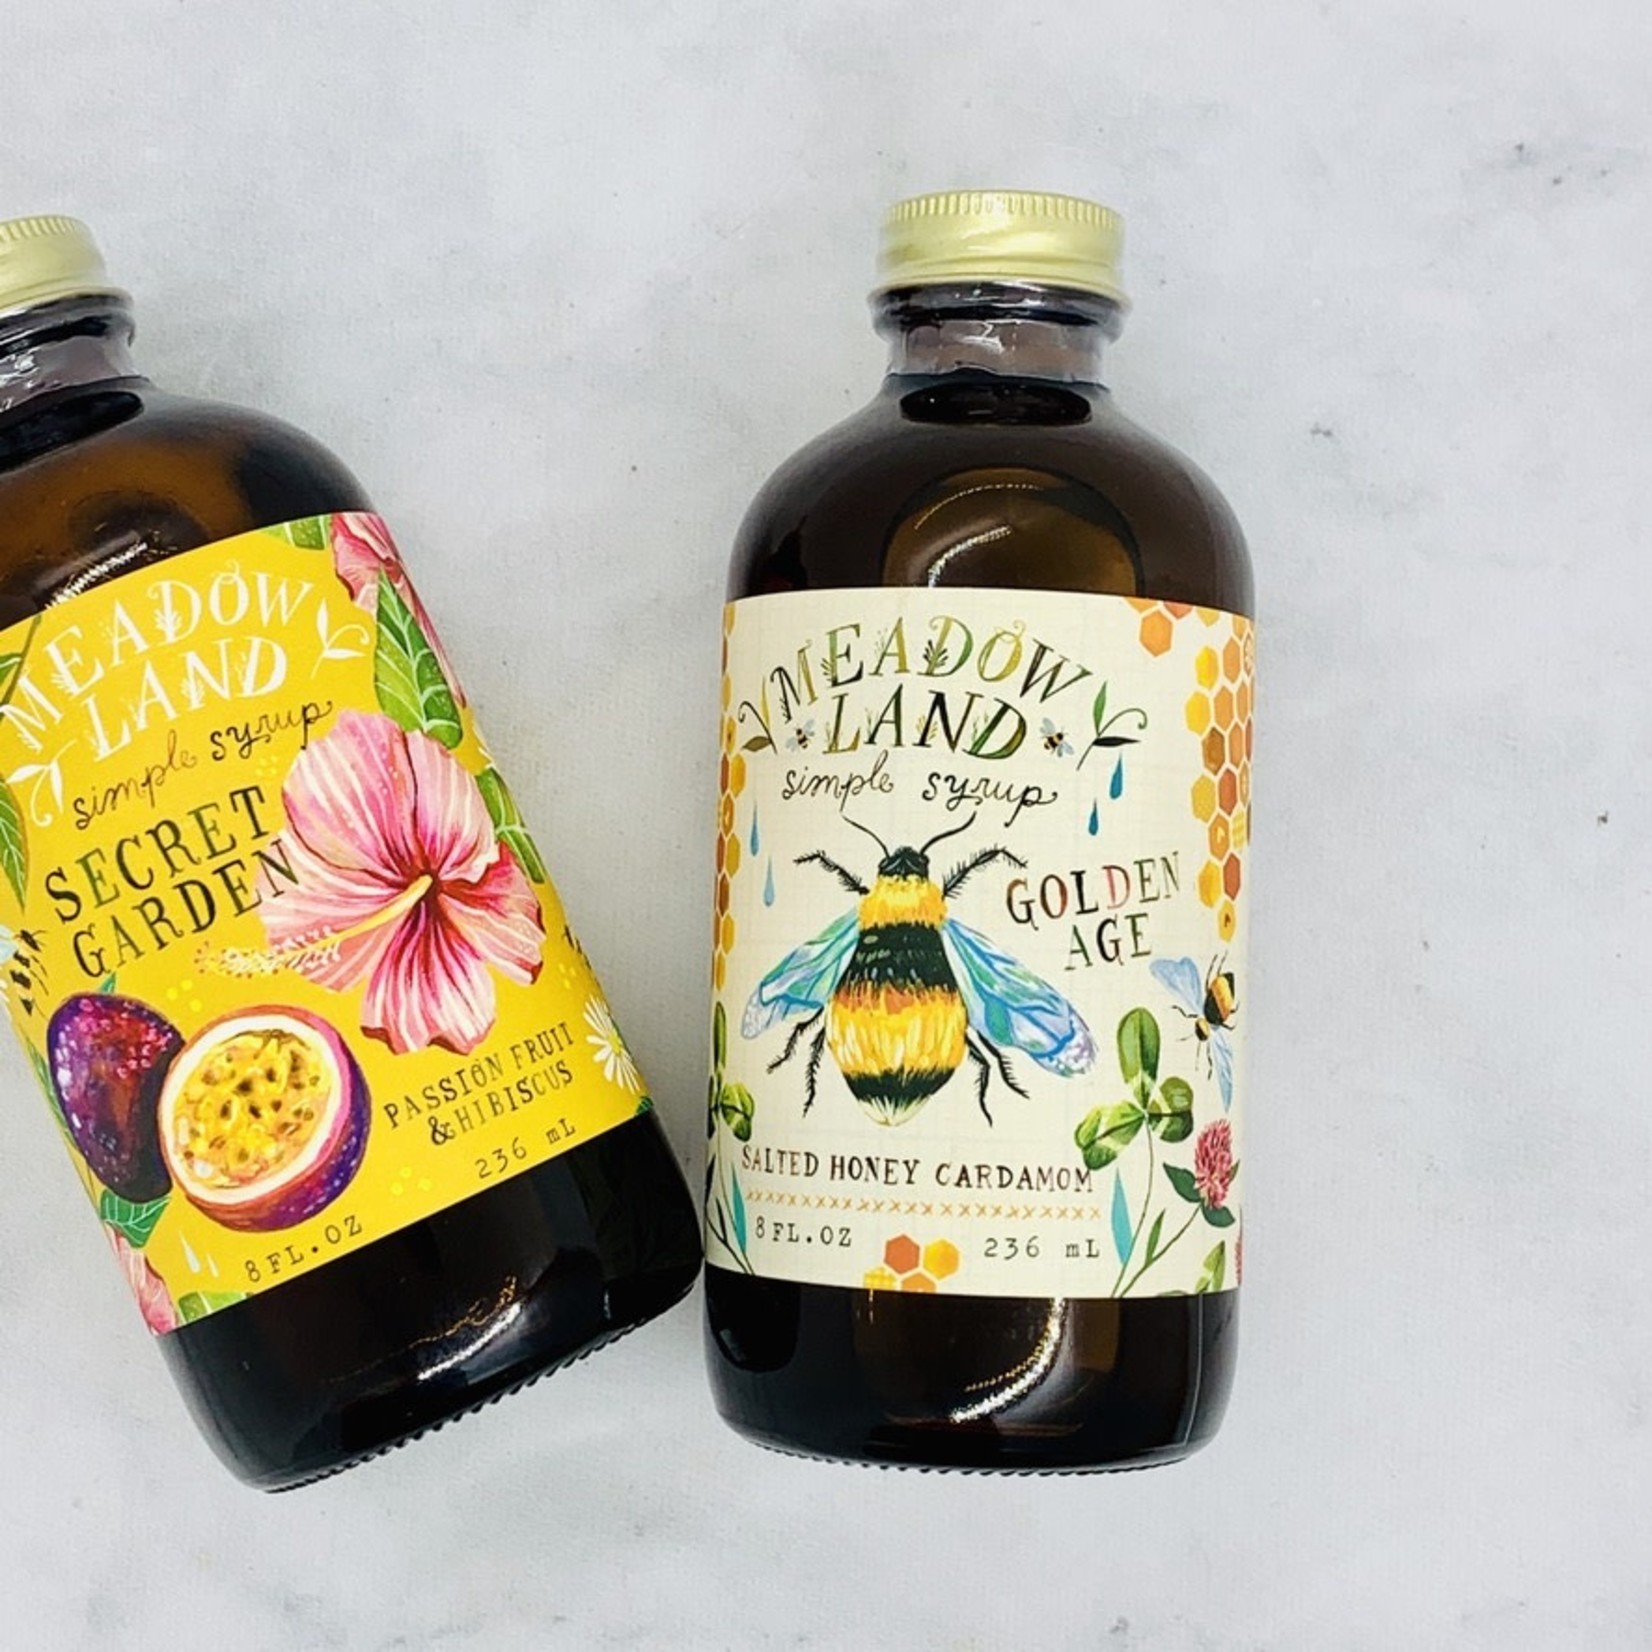 Meadowland Syrup Meadowland Syrup